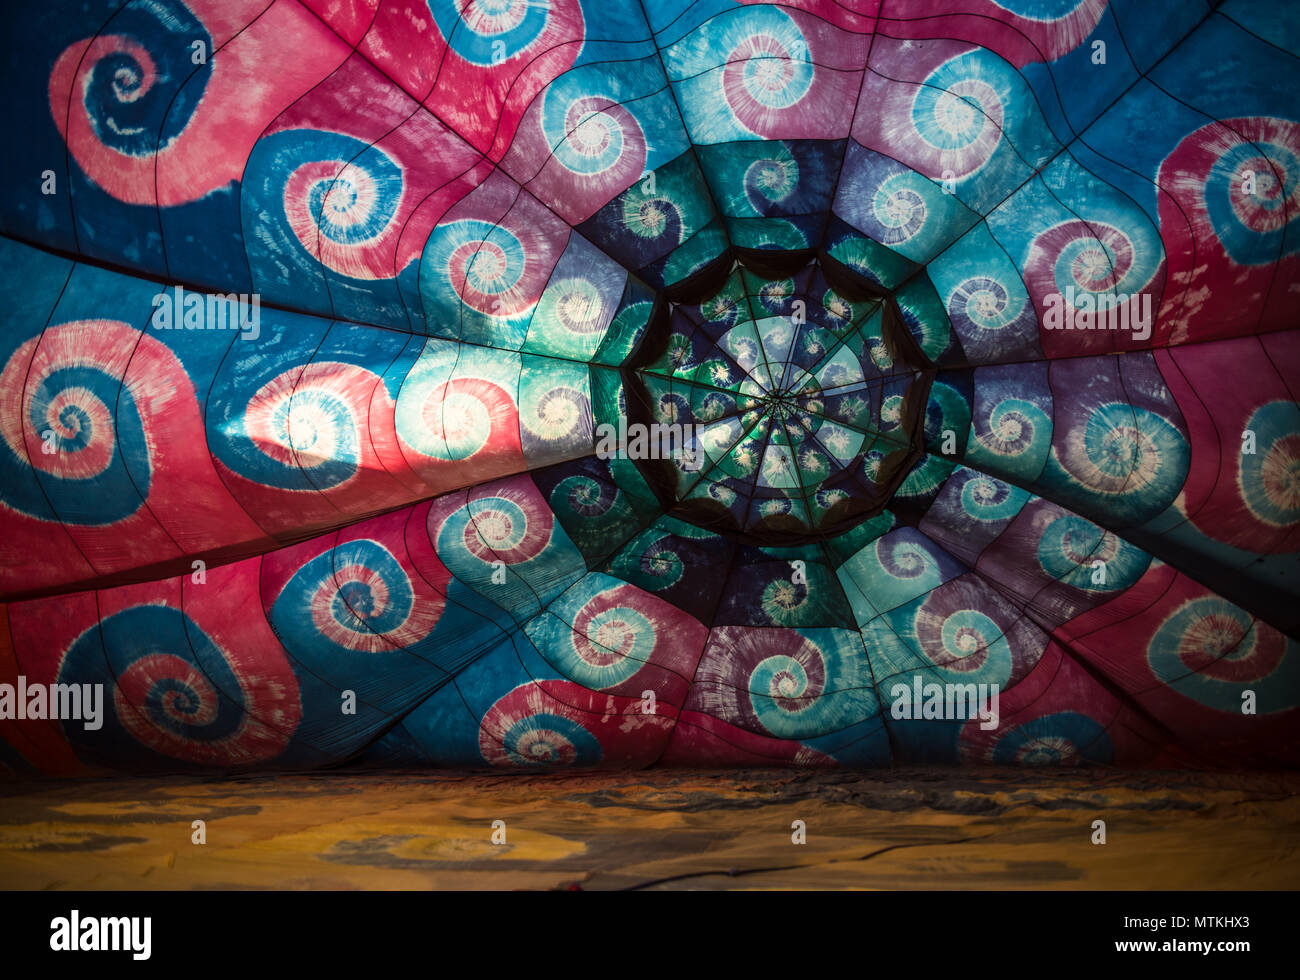 Close up on a design on a hot air balloon near the ground. Stock Photo